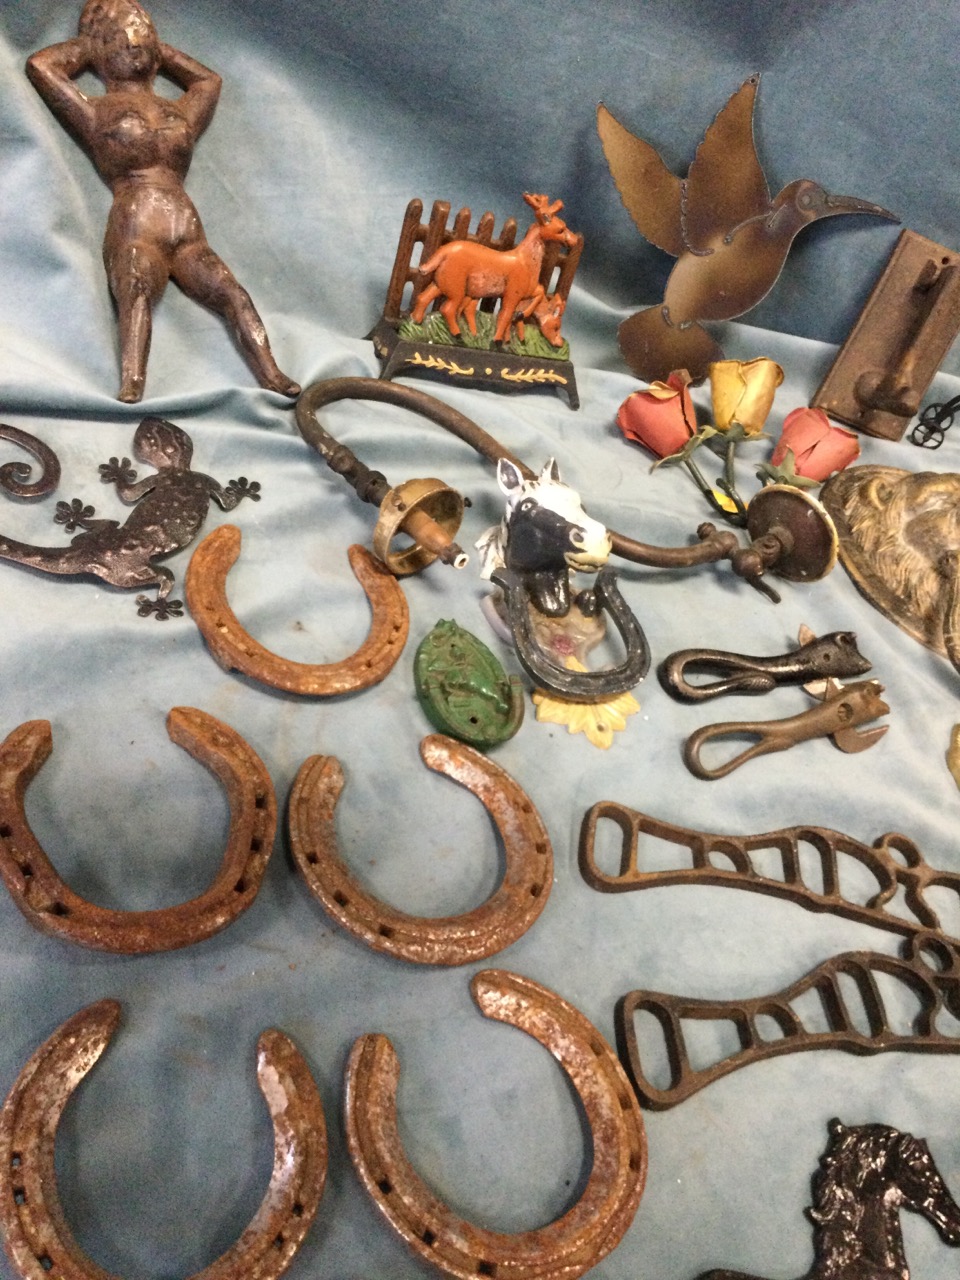 Miscellaneous metalware including four lionmask door knockers, a cast iron figure, horseshoes, pegs, - Image 3 of 3